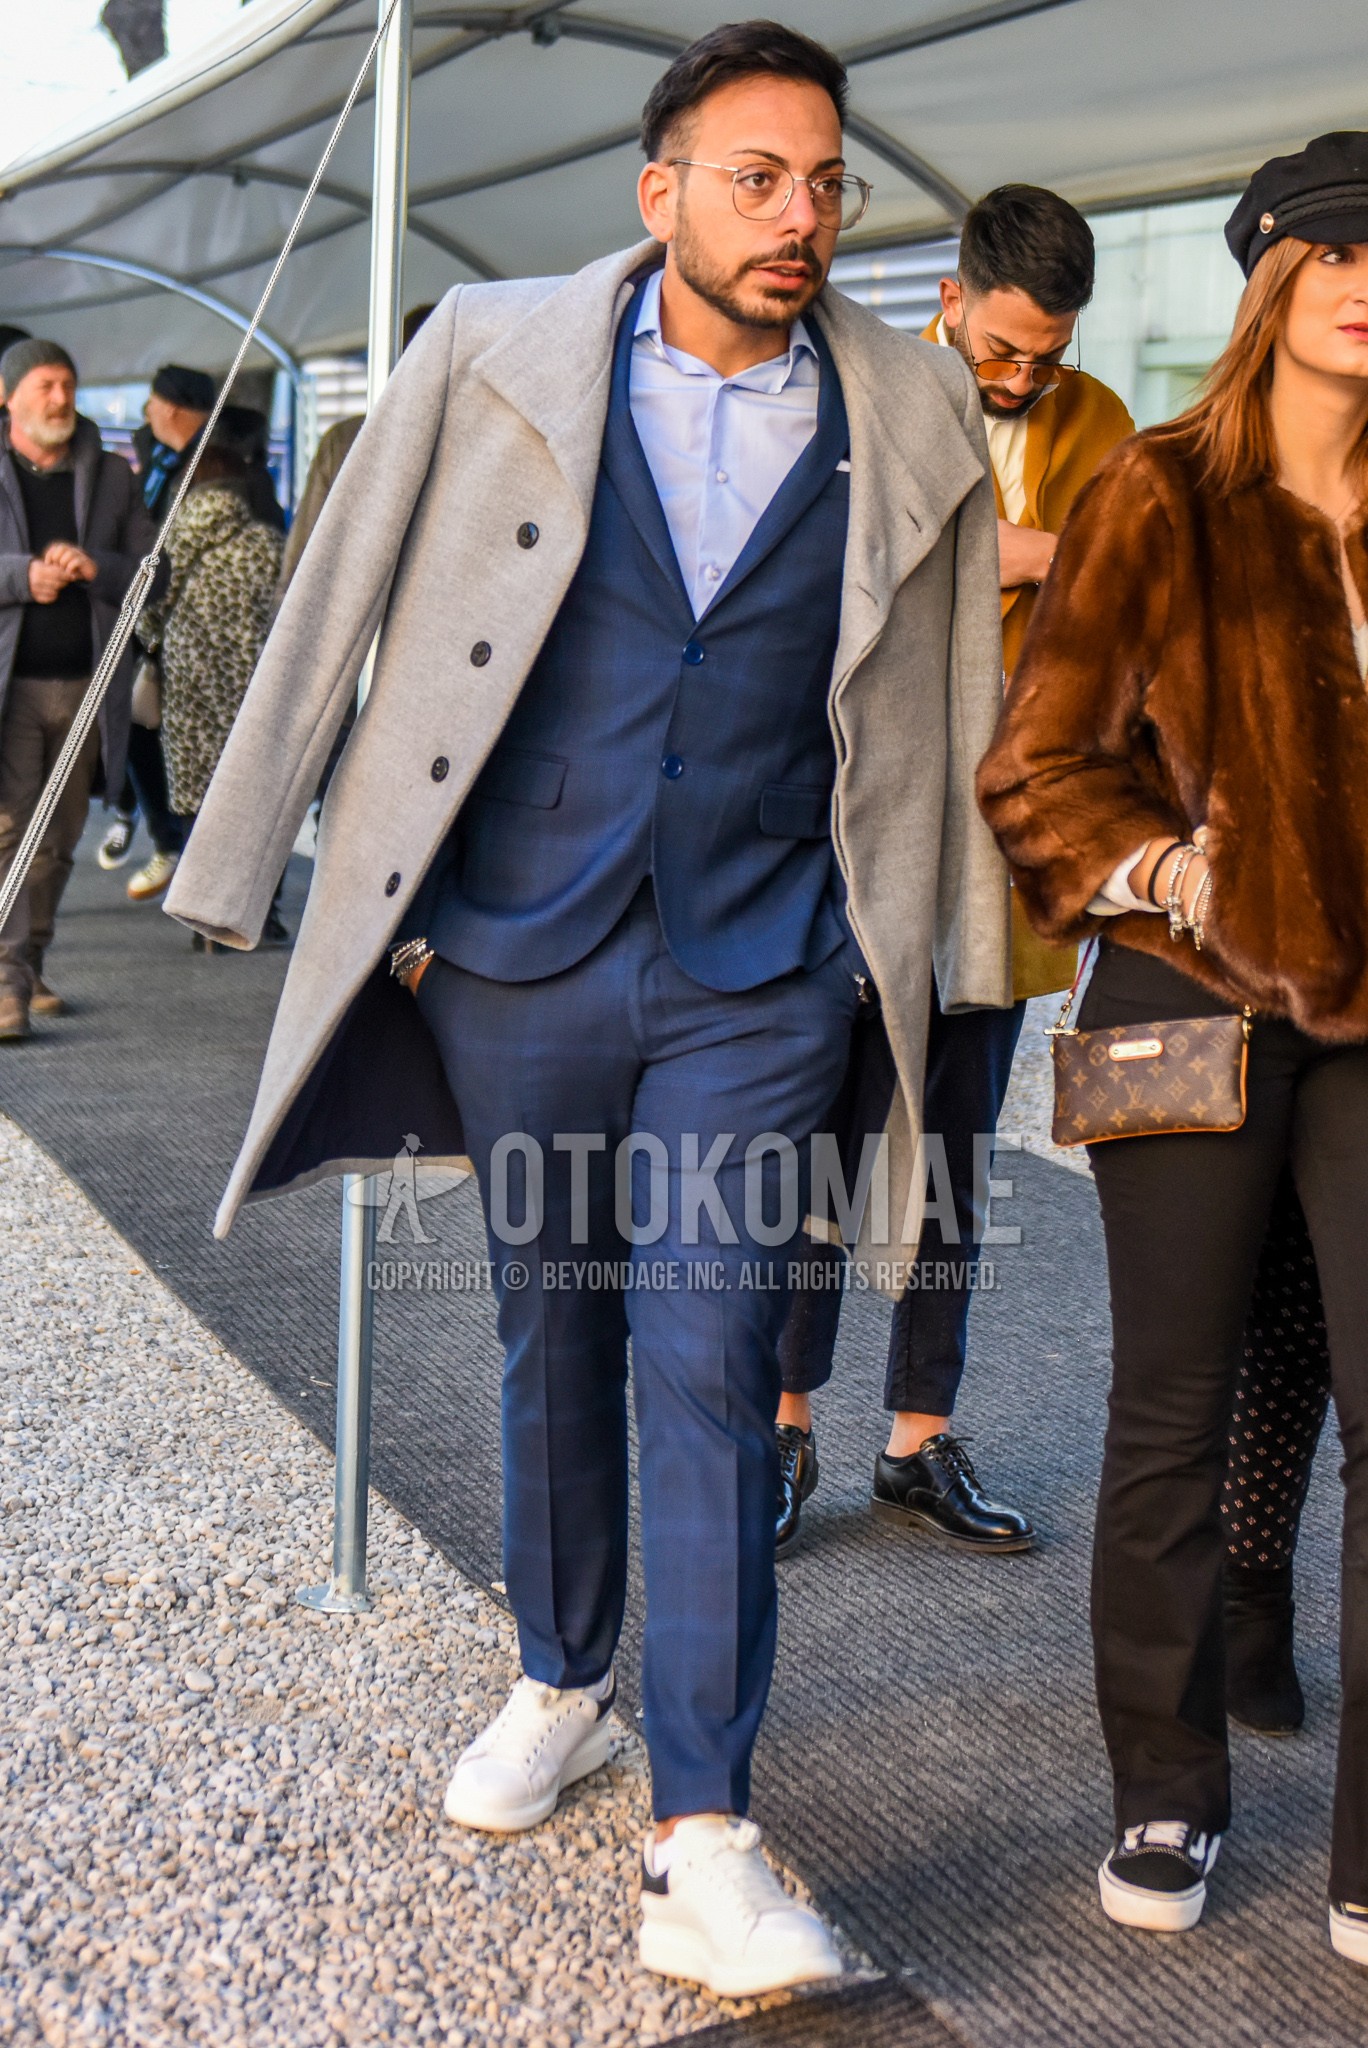 Men's autumn winter outfit with silver plain glasses, gray plain stand collar coat, white plain shirt, white low-cut sneakers, gray check suit.